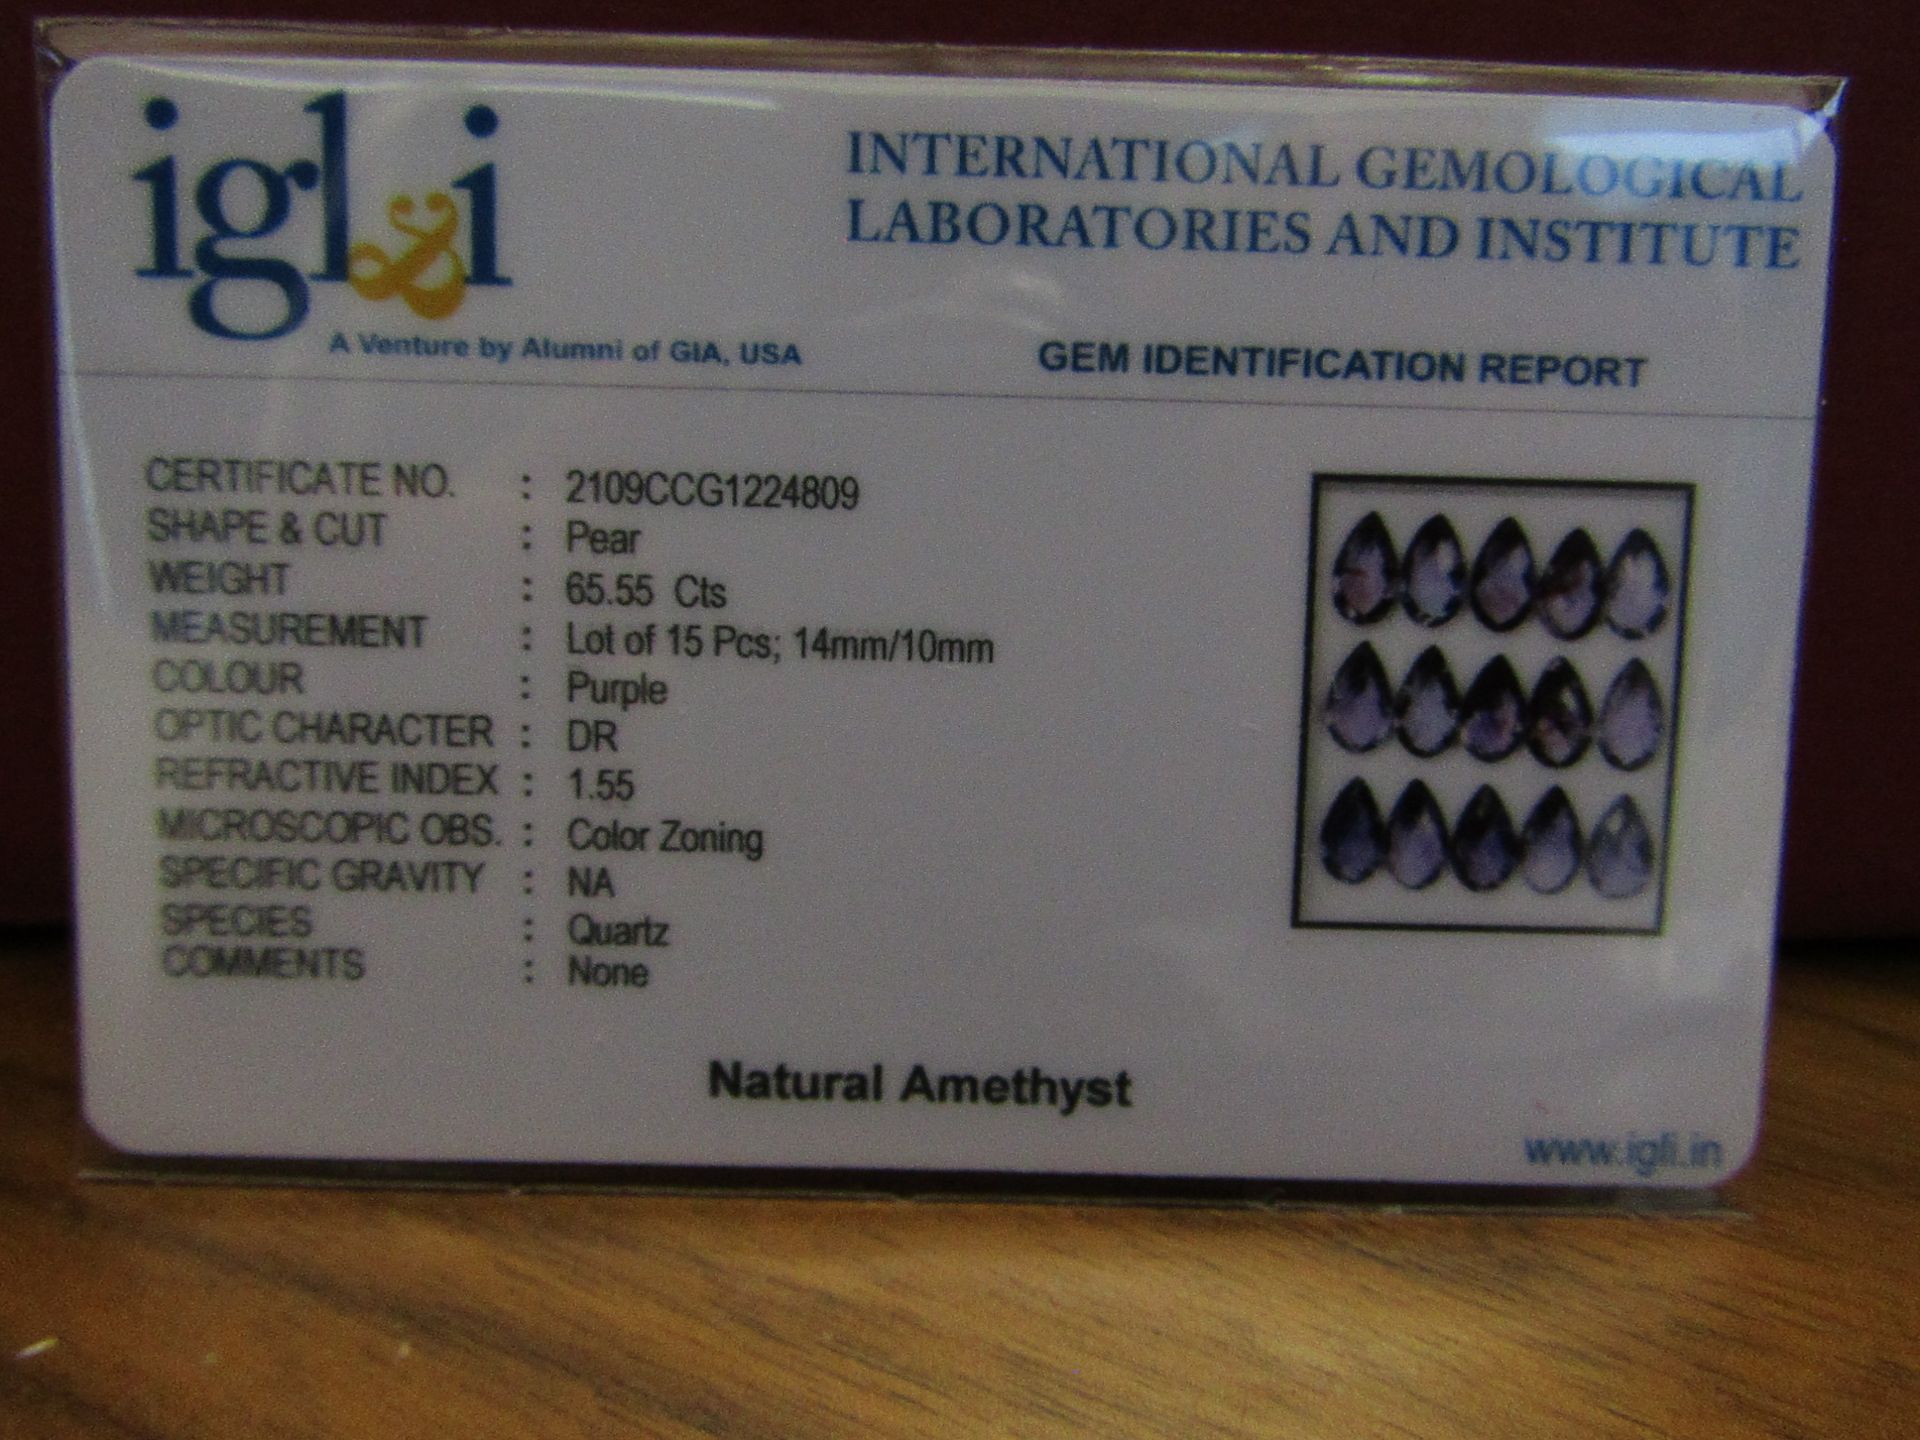 IGL&I Certified - Natural Brazilian Amethyst - 65.55 Carats - 15 Pieces - Checkerboard Pear Cut - - Image 2 of 3